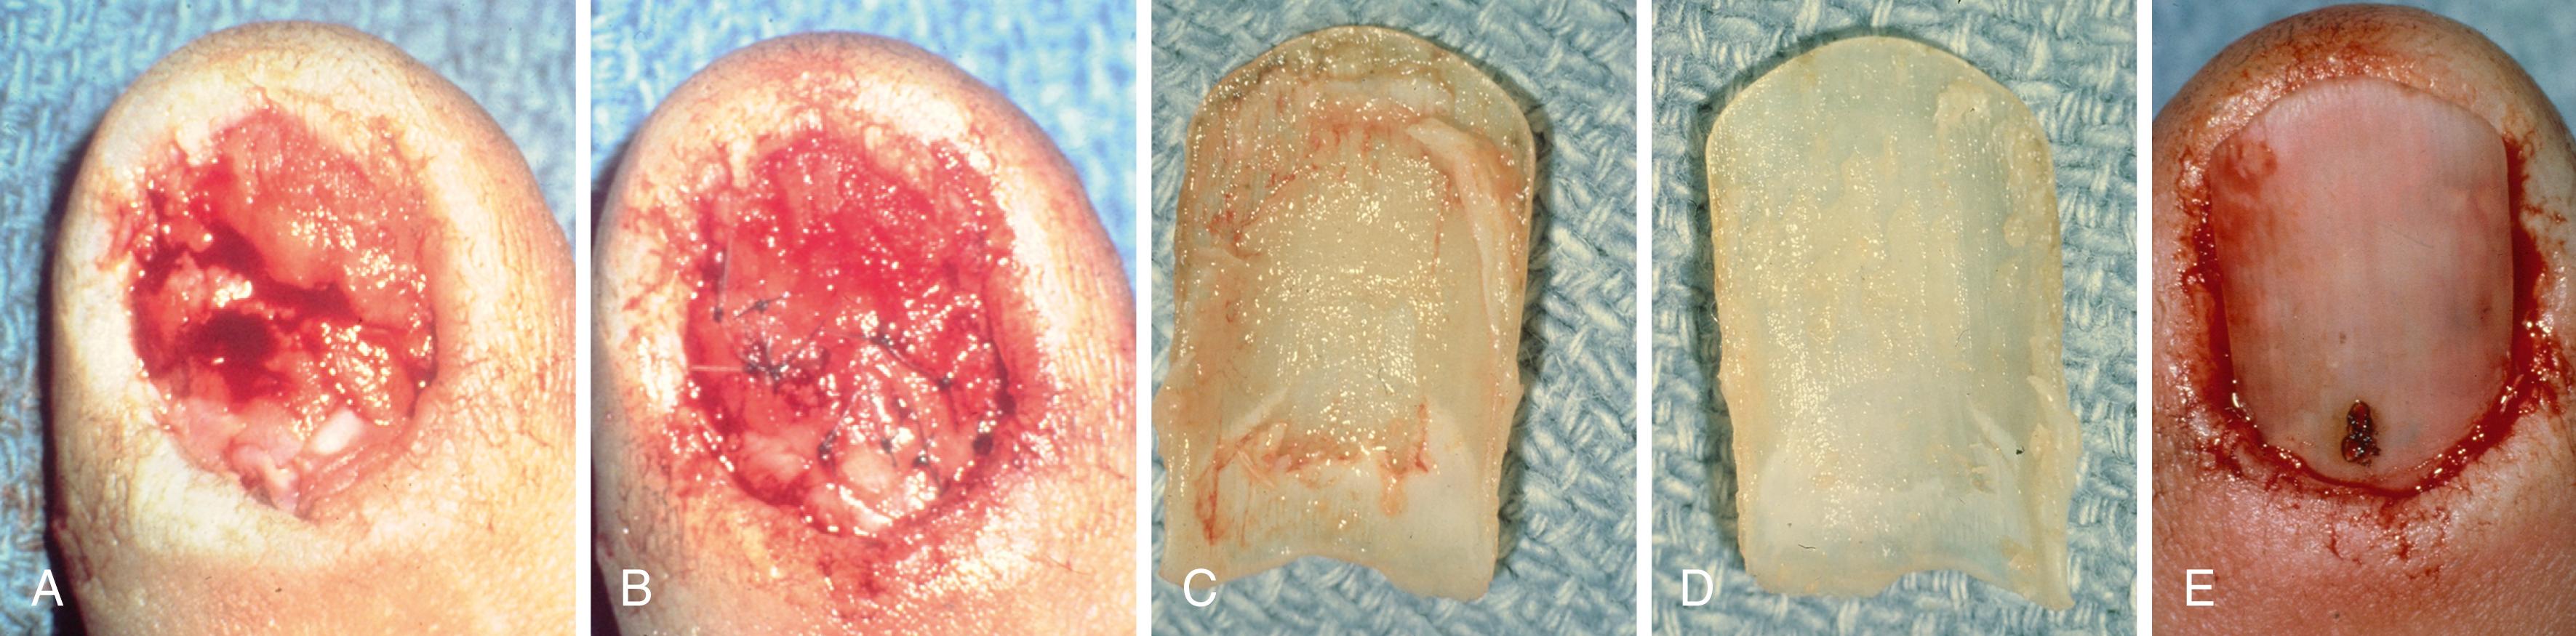 Fig. 9.5, A, Stellate laceration of nail bed is visible after the nail is removed. B, The lacerations are approximated with 7-0 chromic suture under loop magnification. C, Undersurface of the removed nail with residual soft tissue. D, The undersurface of the nail after it has been cleaned and soaked. E, A hole large enough to allow drainage has been burned through the nail and the nail has been inserted back into the nail fold.